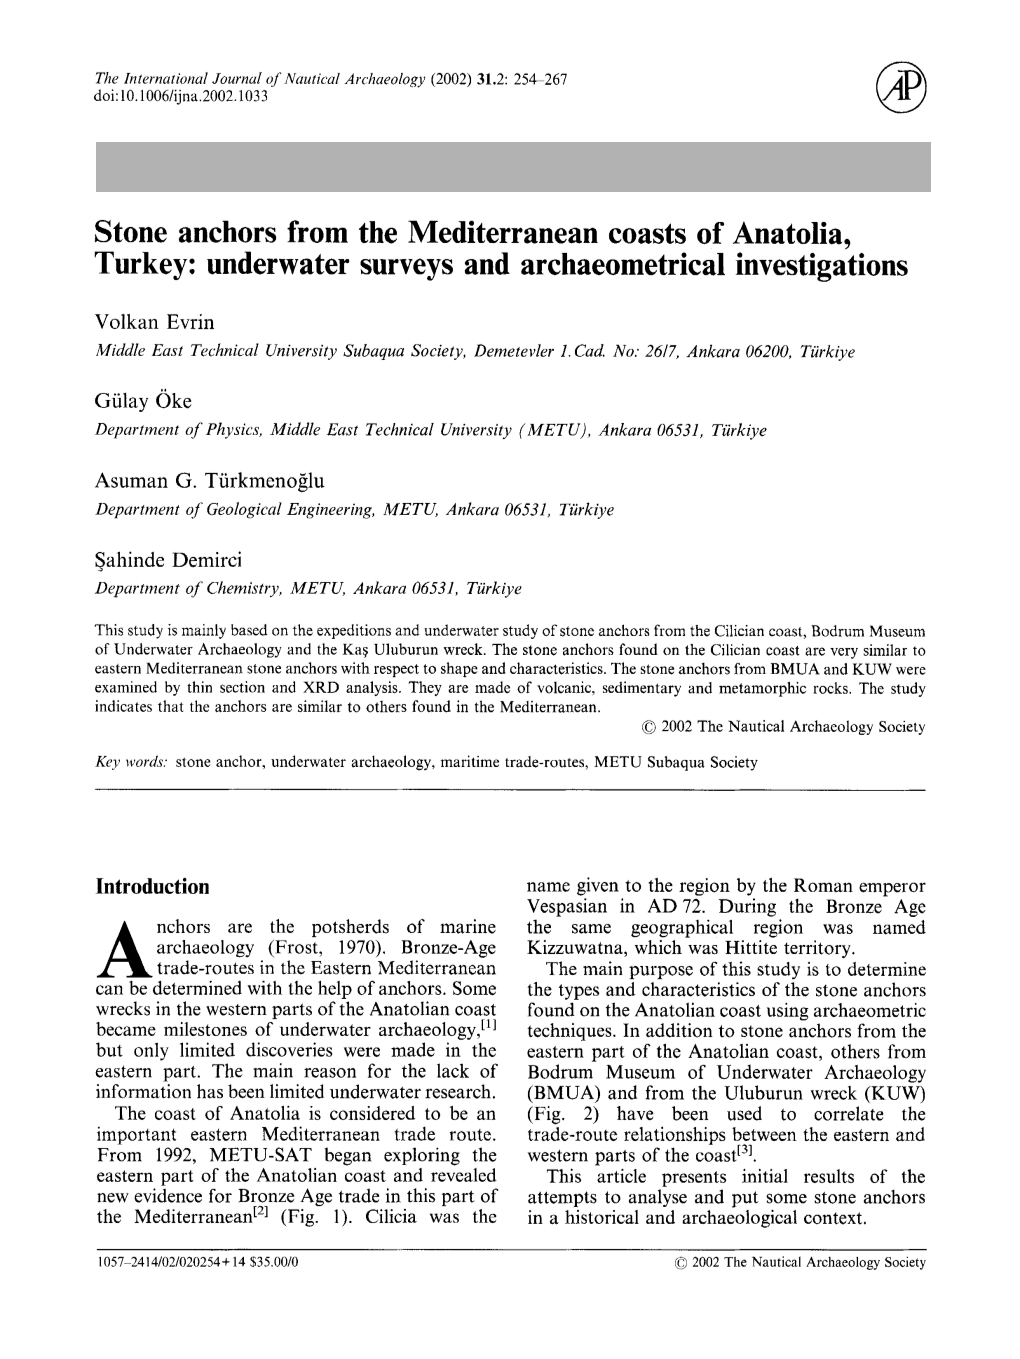 Stone Anchors from the Mediterranean Coasts of Anatolia, Turkey: Underwater Surveys and Archaeometrical Investigations